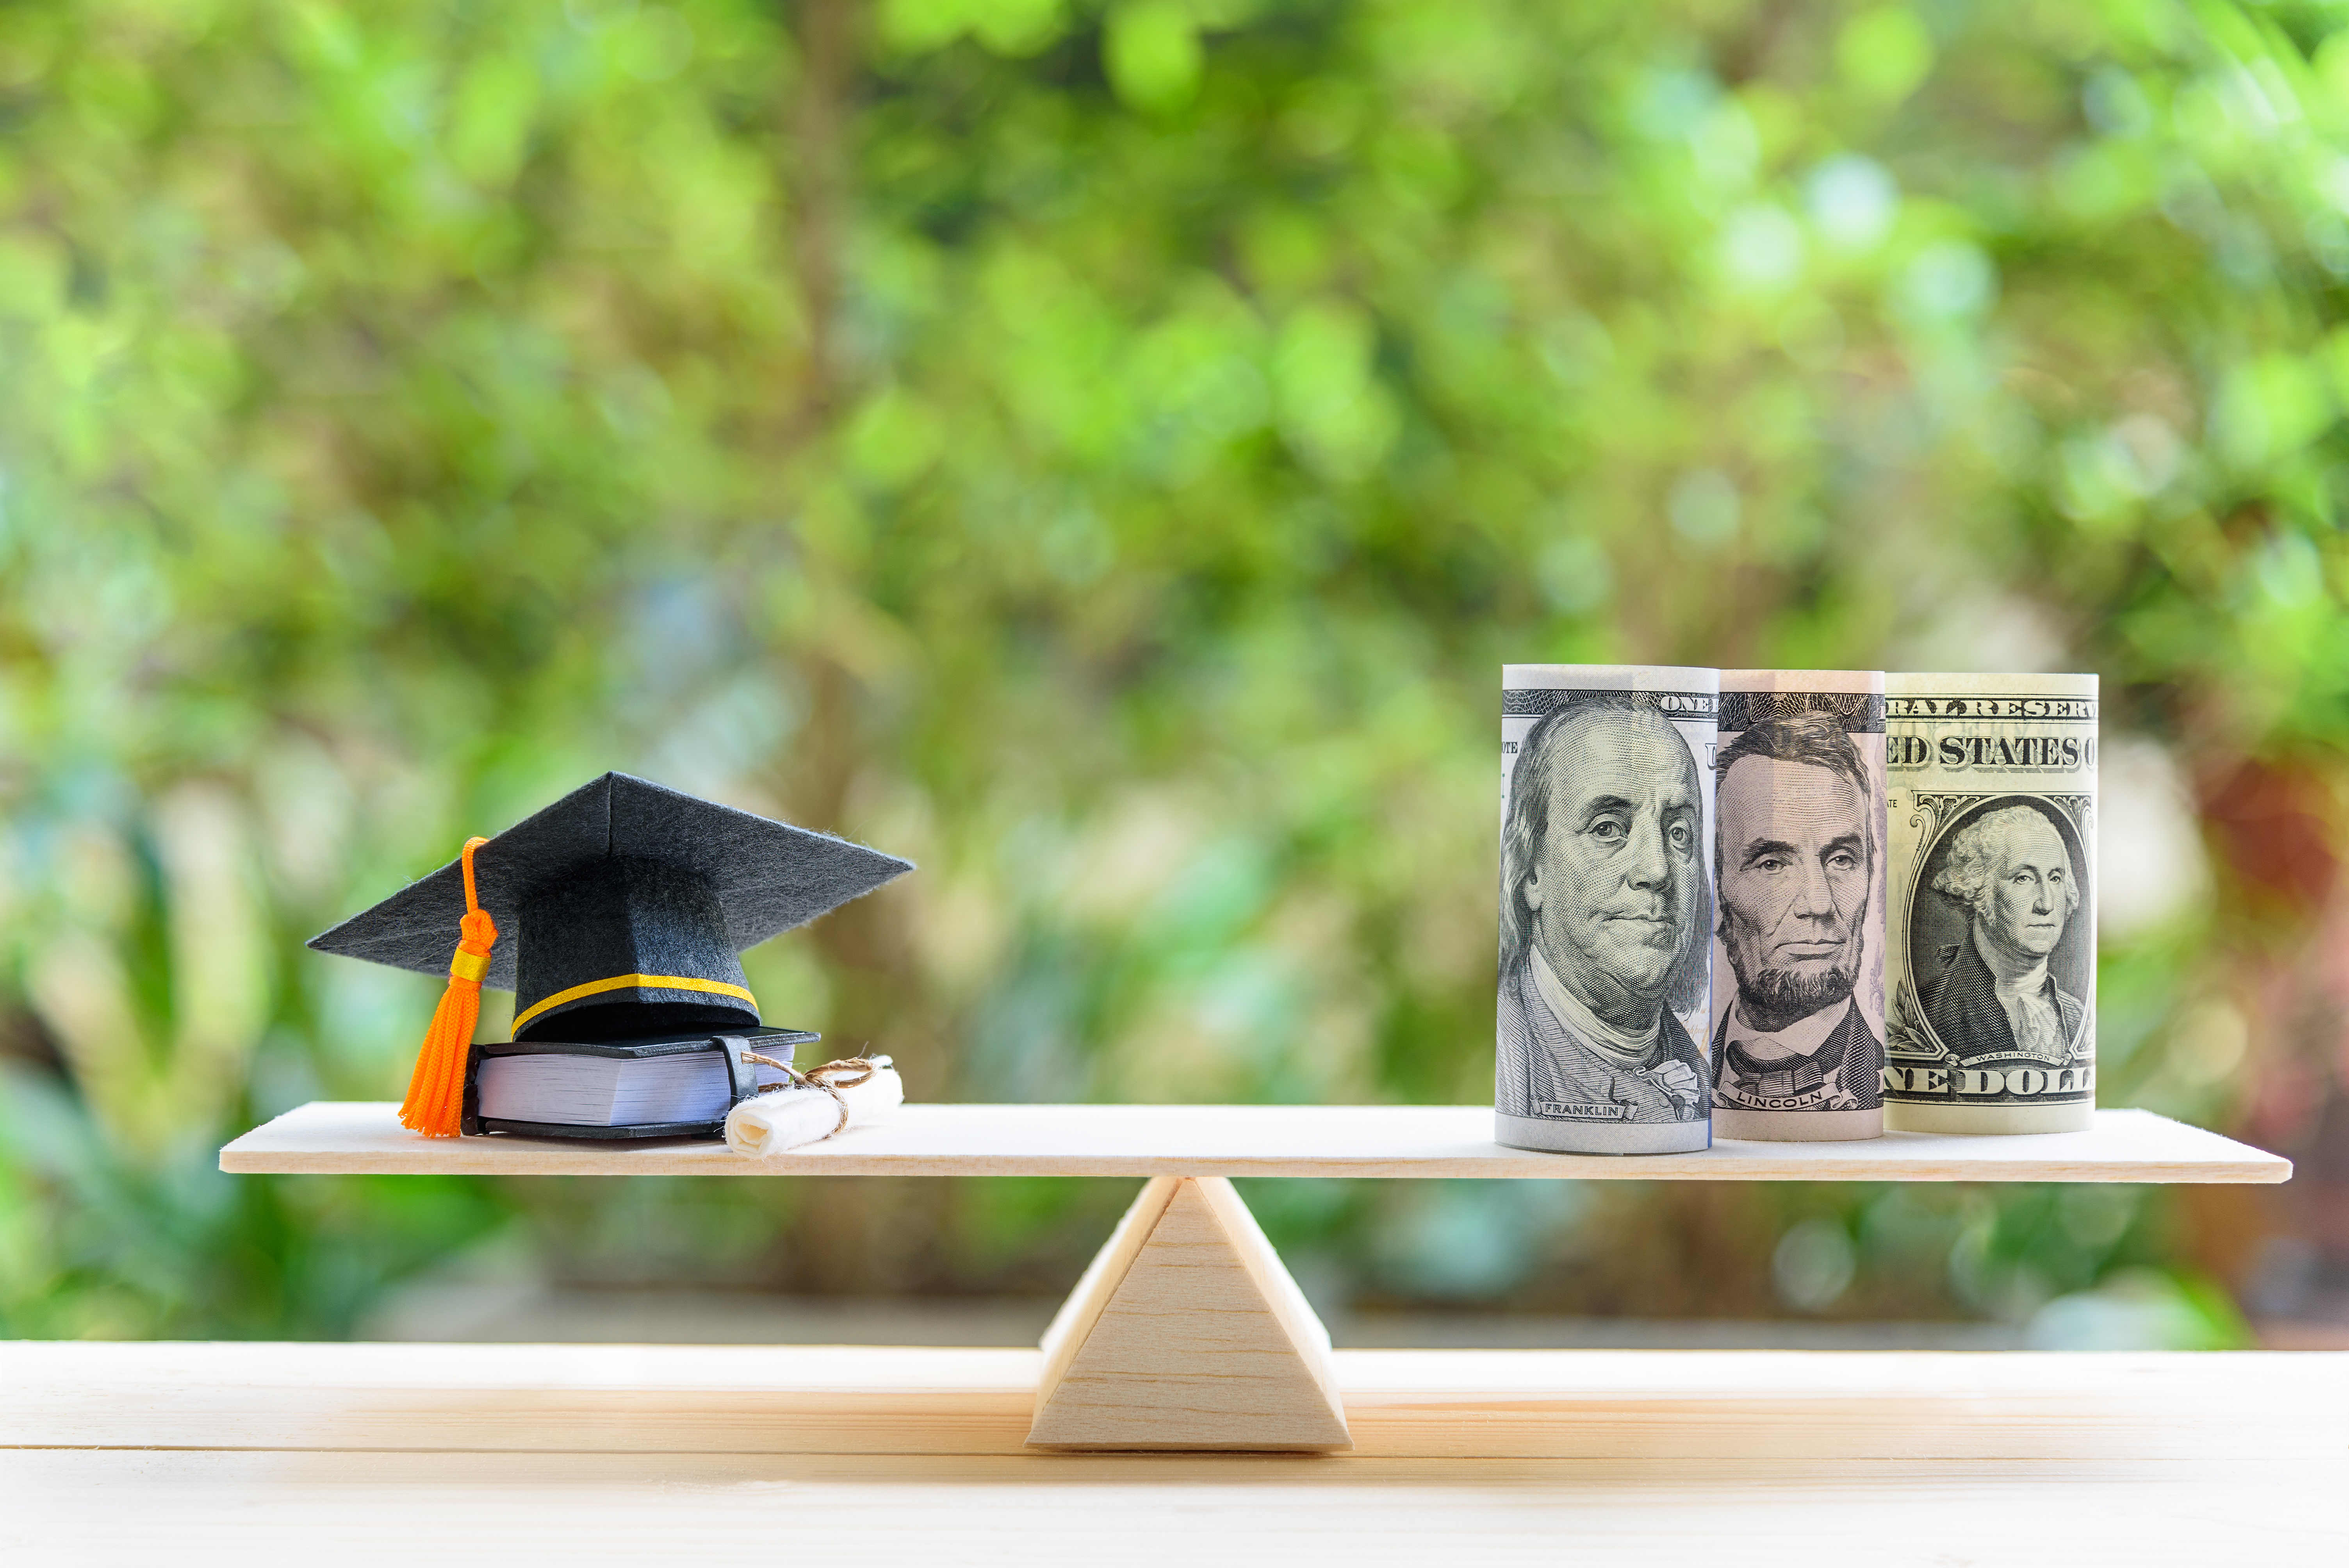 Monetary Inquisition Group LLC dba FREEDOM LOAN RESOLUTION Helps Students Tackle Student Debt